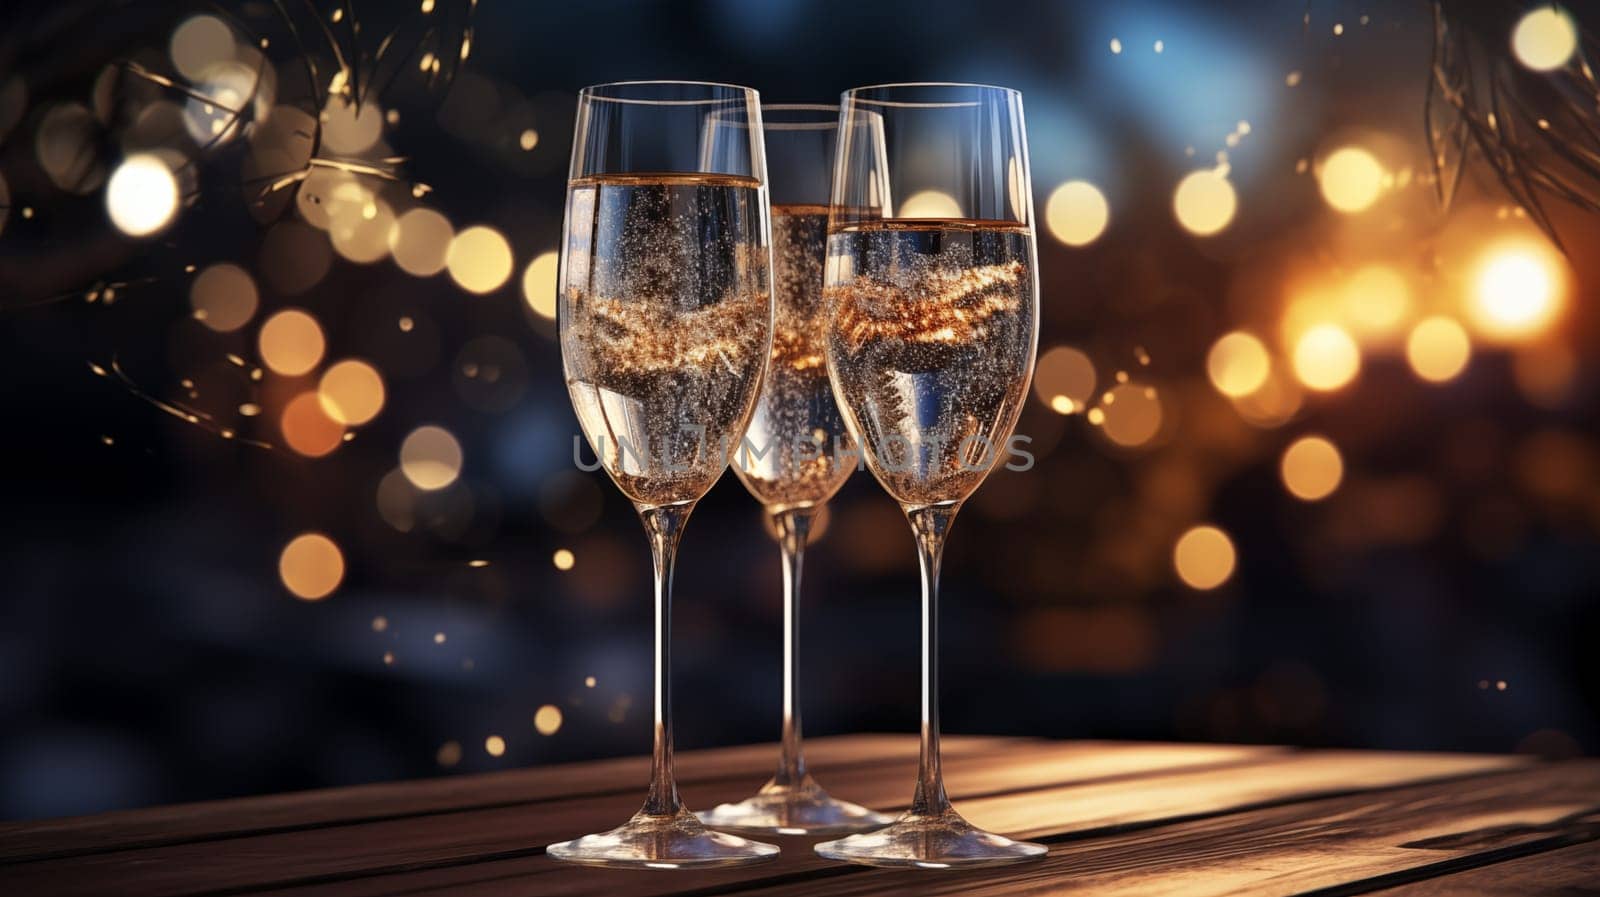 Three glasses of champagne with particles of gold stand on the table in the evening, surrounded by golden bokeh lights.